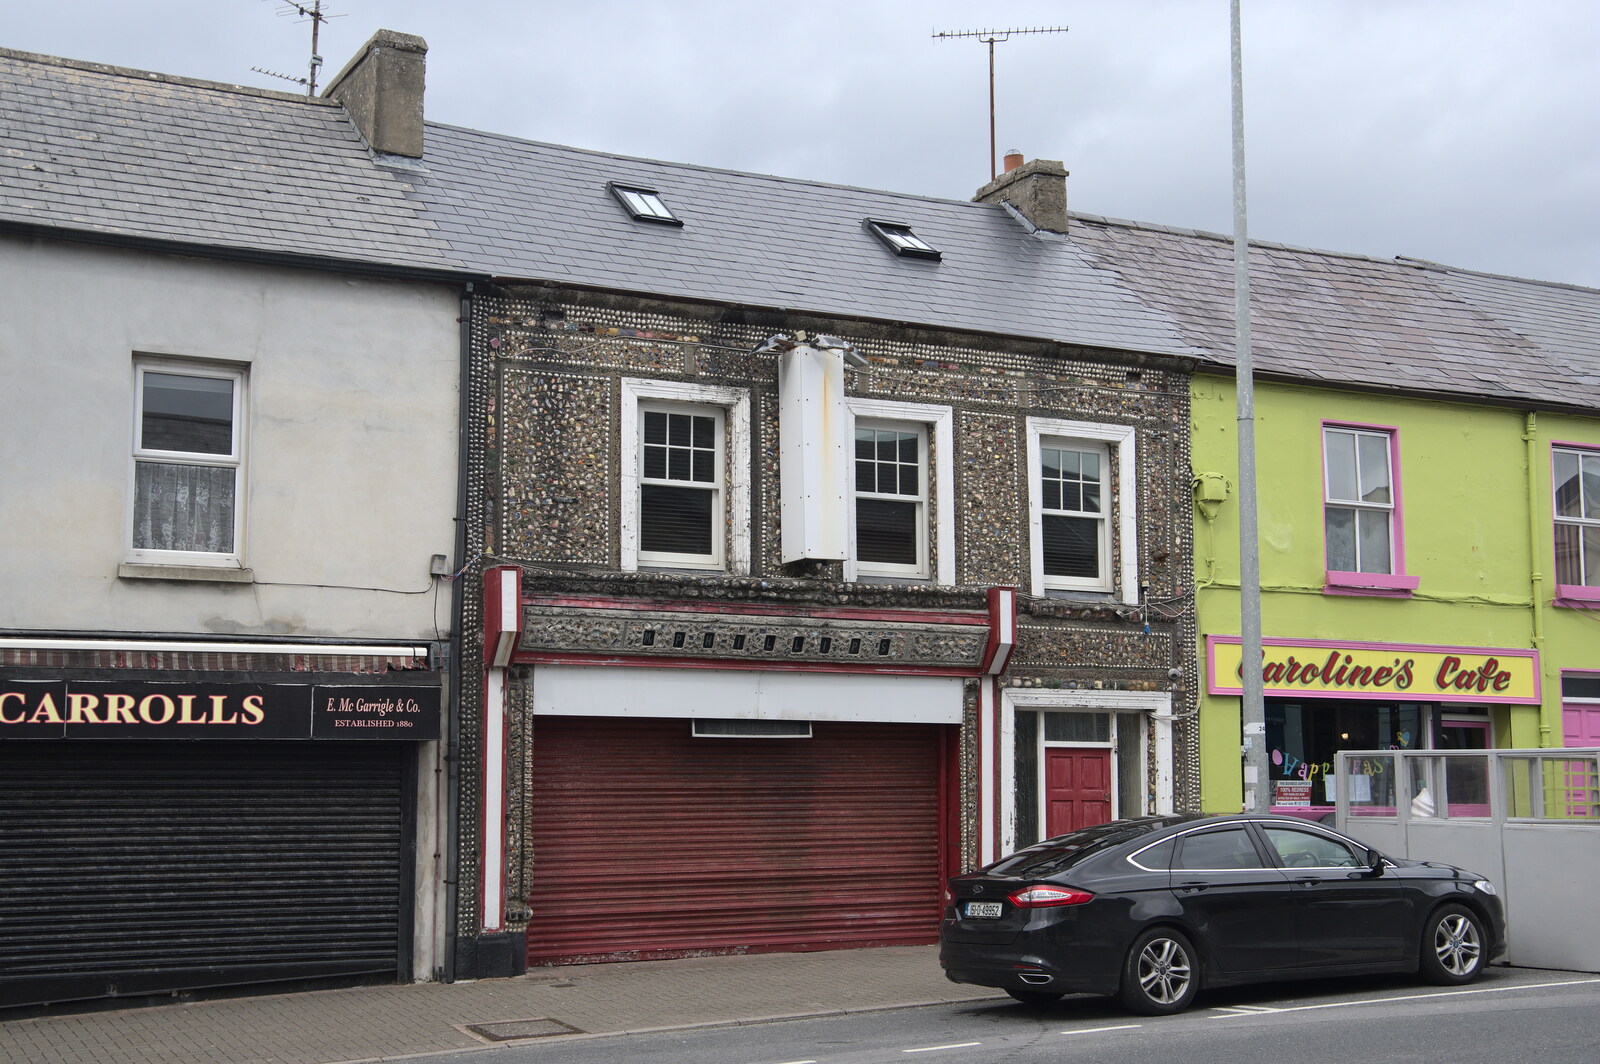 A shop is covered with shells from Manorhamilton and Bundoran, Leitrim and Donegal, Ireland - 16th April 2022